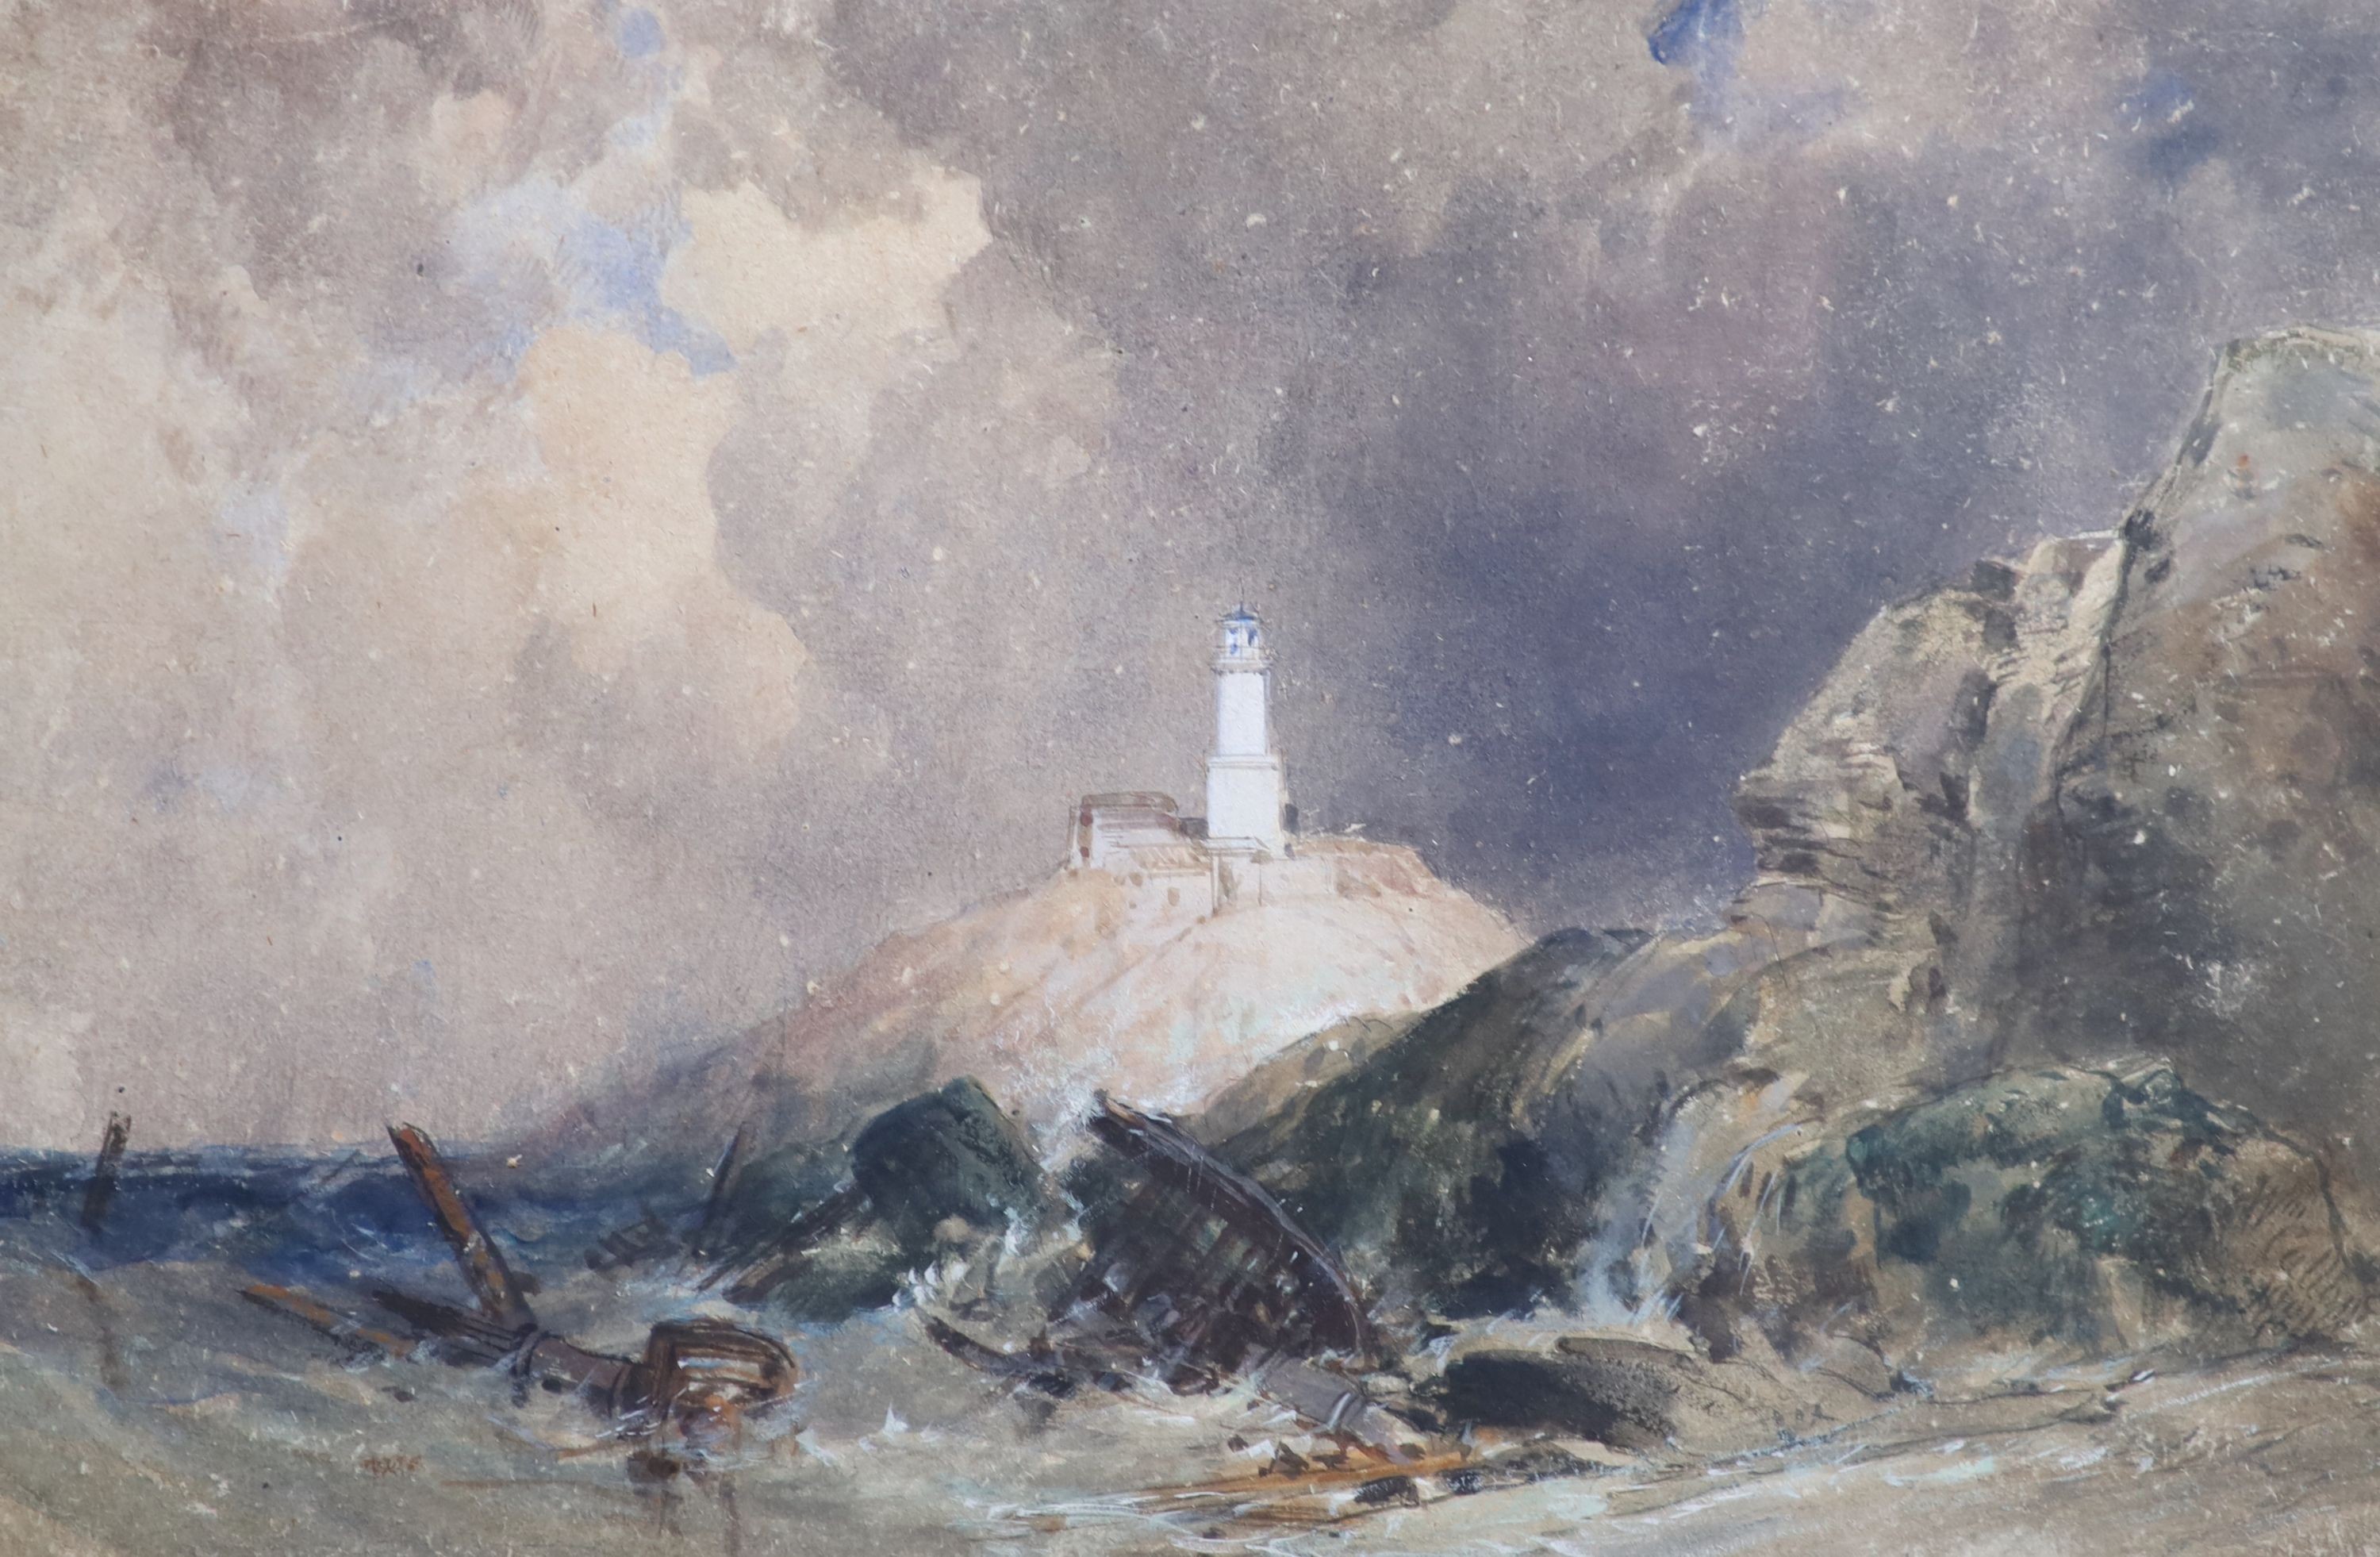 William Callow (1812-1908), Near the Mumbles, Glamorgan, after a storm, 1884, Watercolour, 29.5 x 45cm.